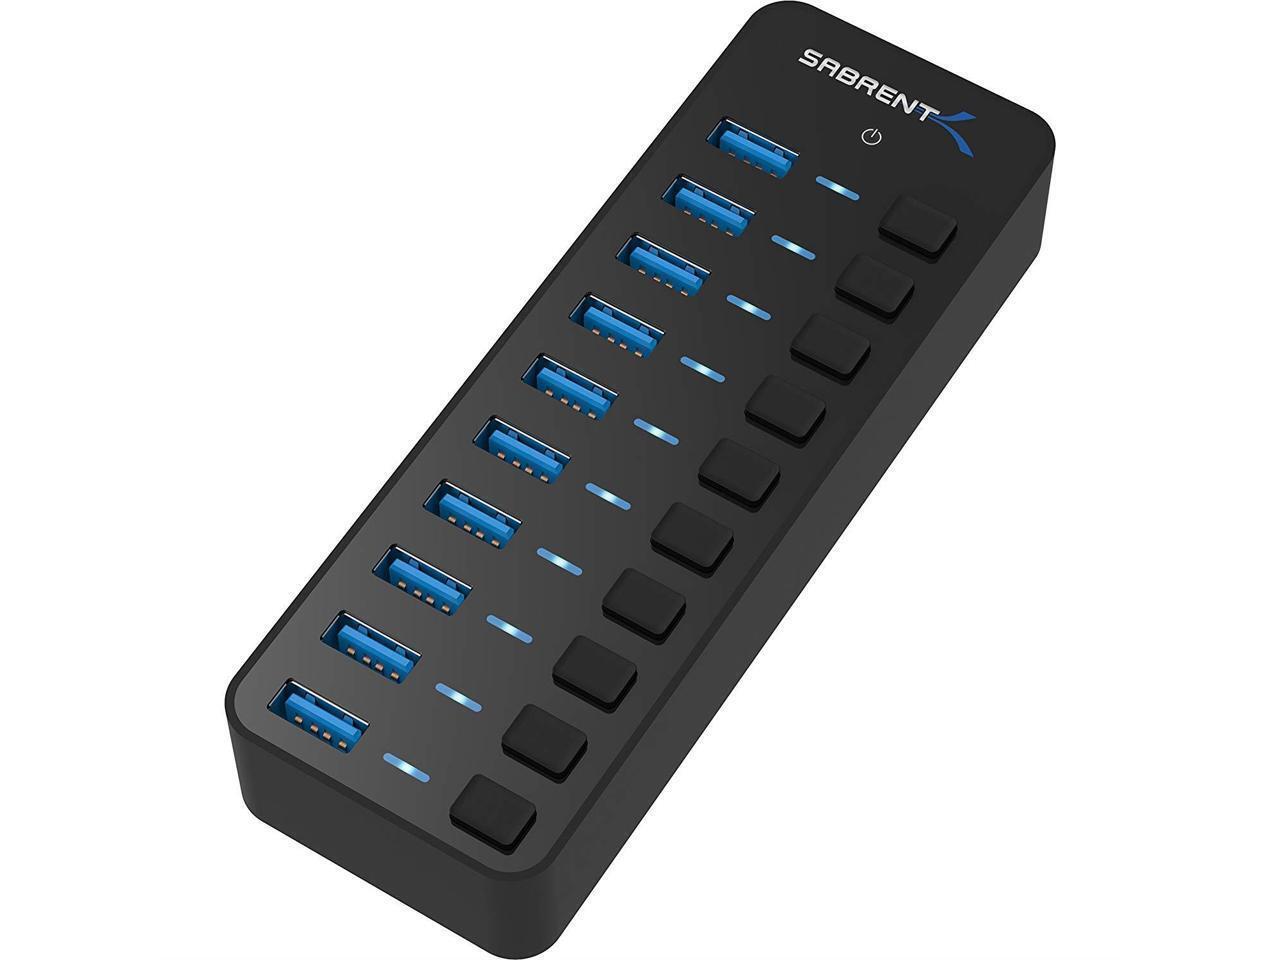 SABRENT 10-Port 60W USB 3.0 Hub with Individual Power Switches and LEDs Includes